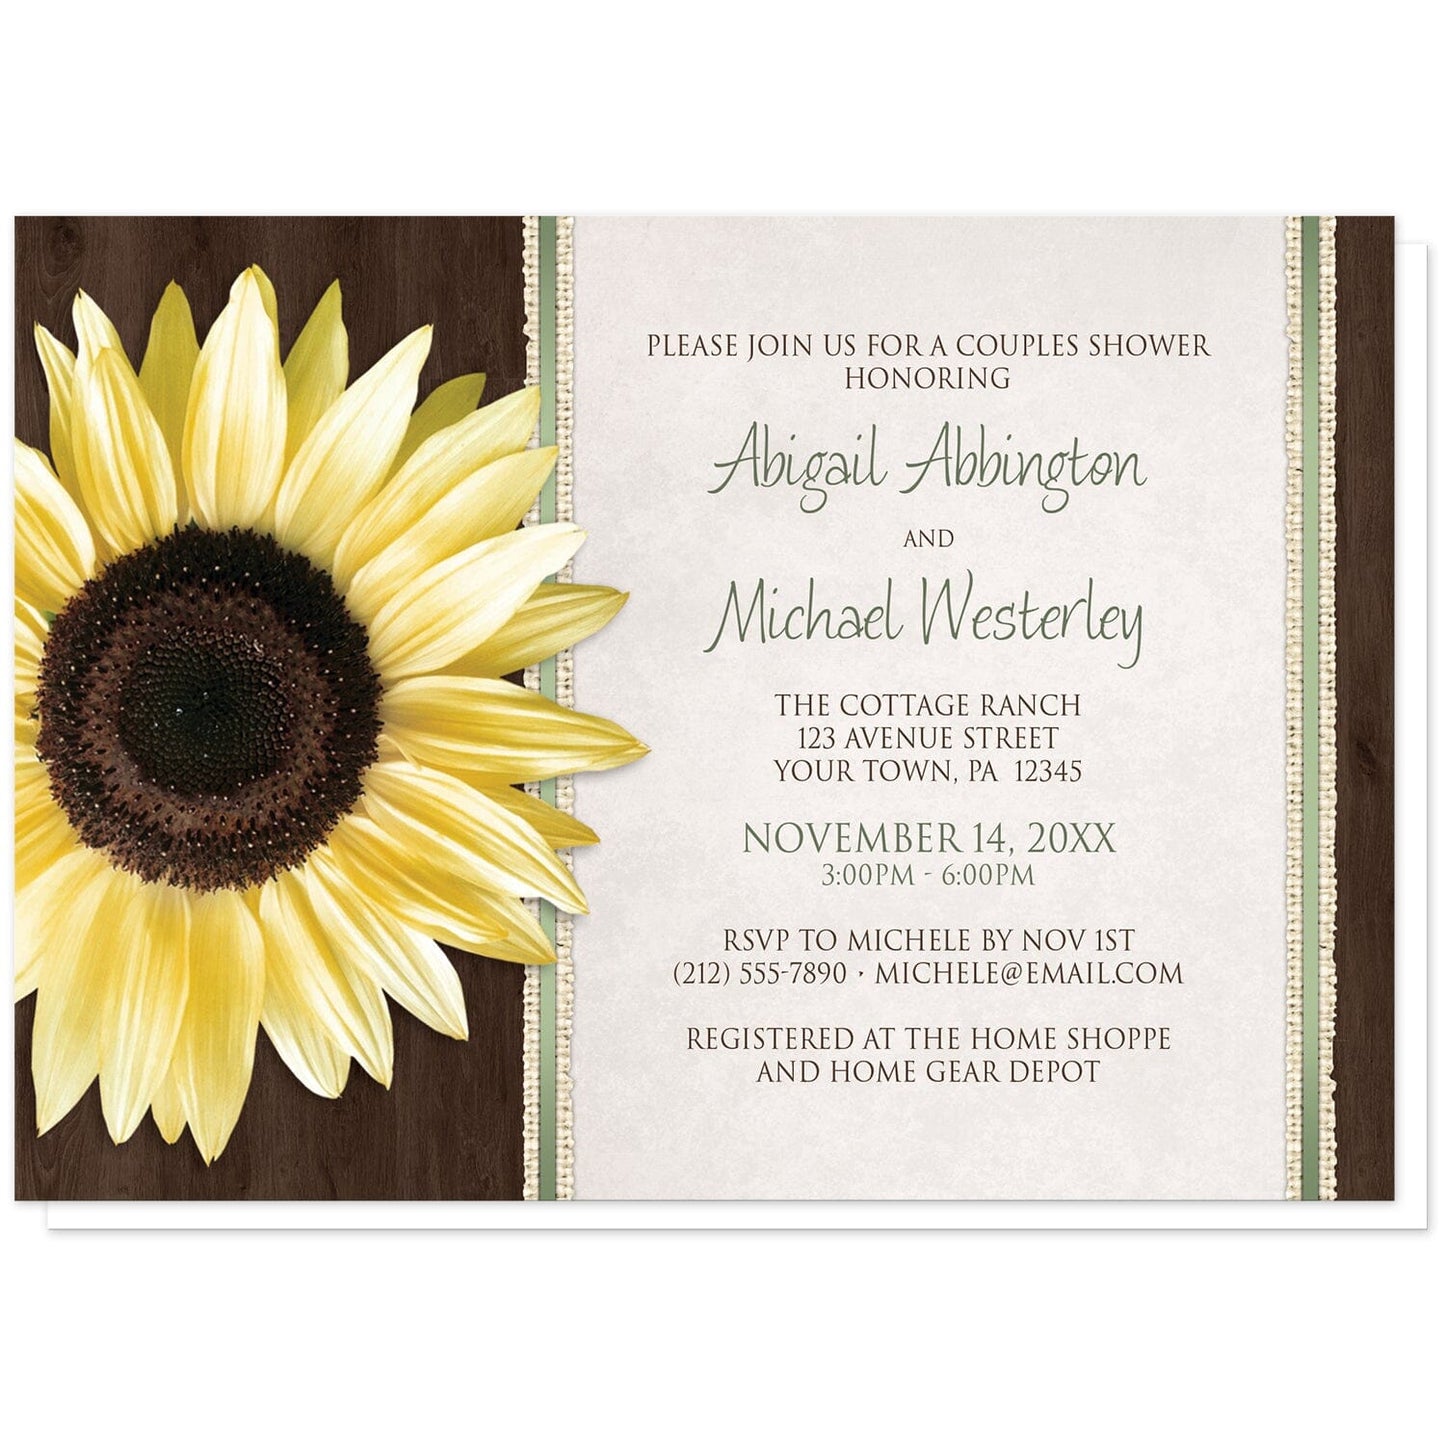 Country Sunflower Wood Brown Green Couples Shower Invitations at Artistically Invited. Country sunflower wood brown green couples shower invitations in a floral southern style, with a big yellow sunflower over a dark brown wood pattern illustration on the left side. Your personalized wedding shower celebration details are custom printed in green and brown over a beige parchment design to the right of the sunflower, outlined vertically by burlap strips and green stripes.